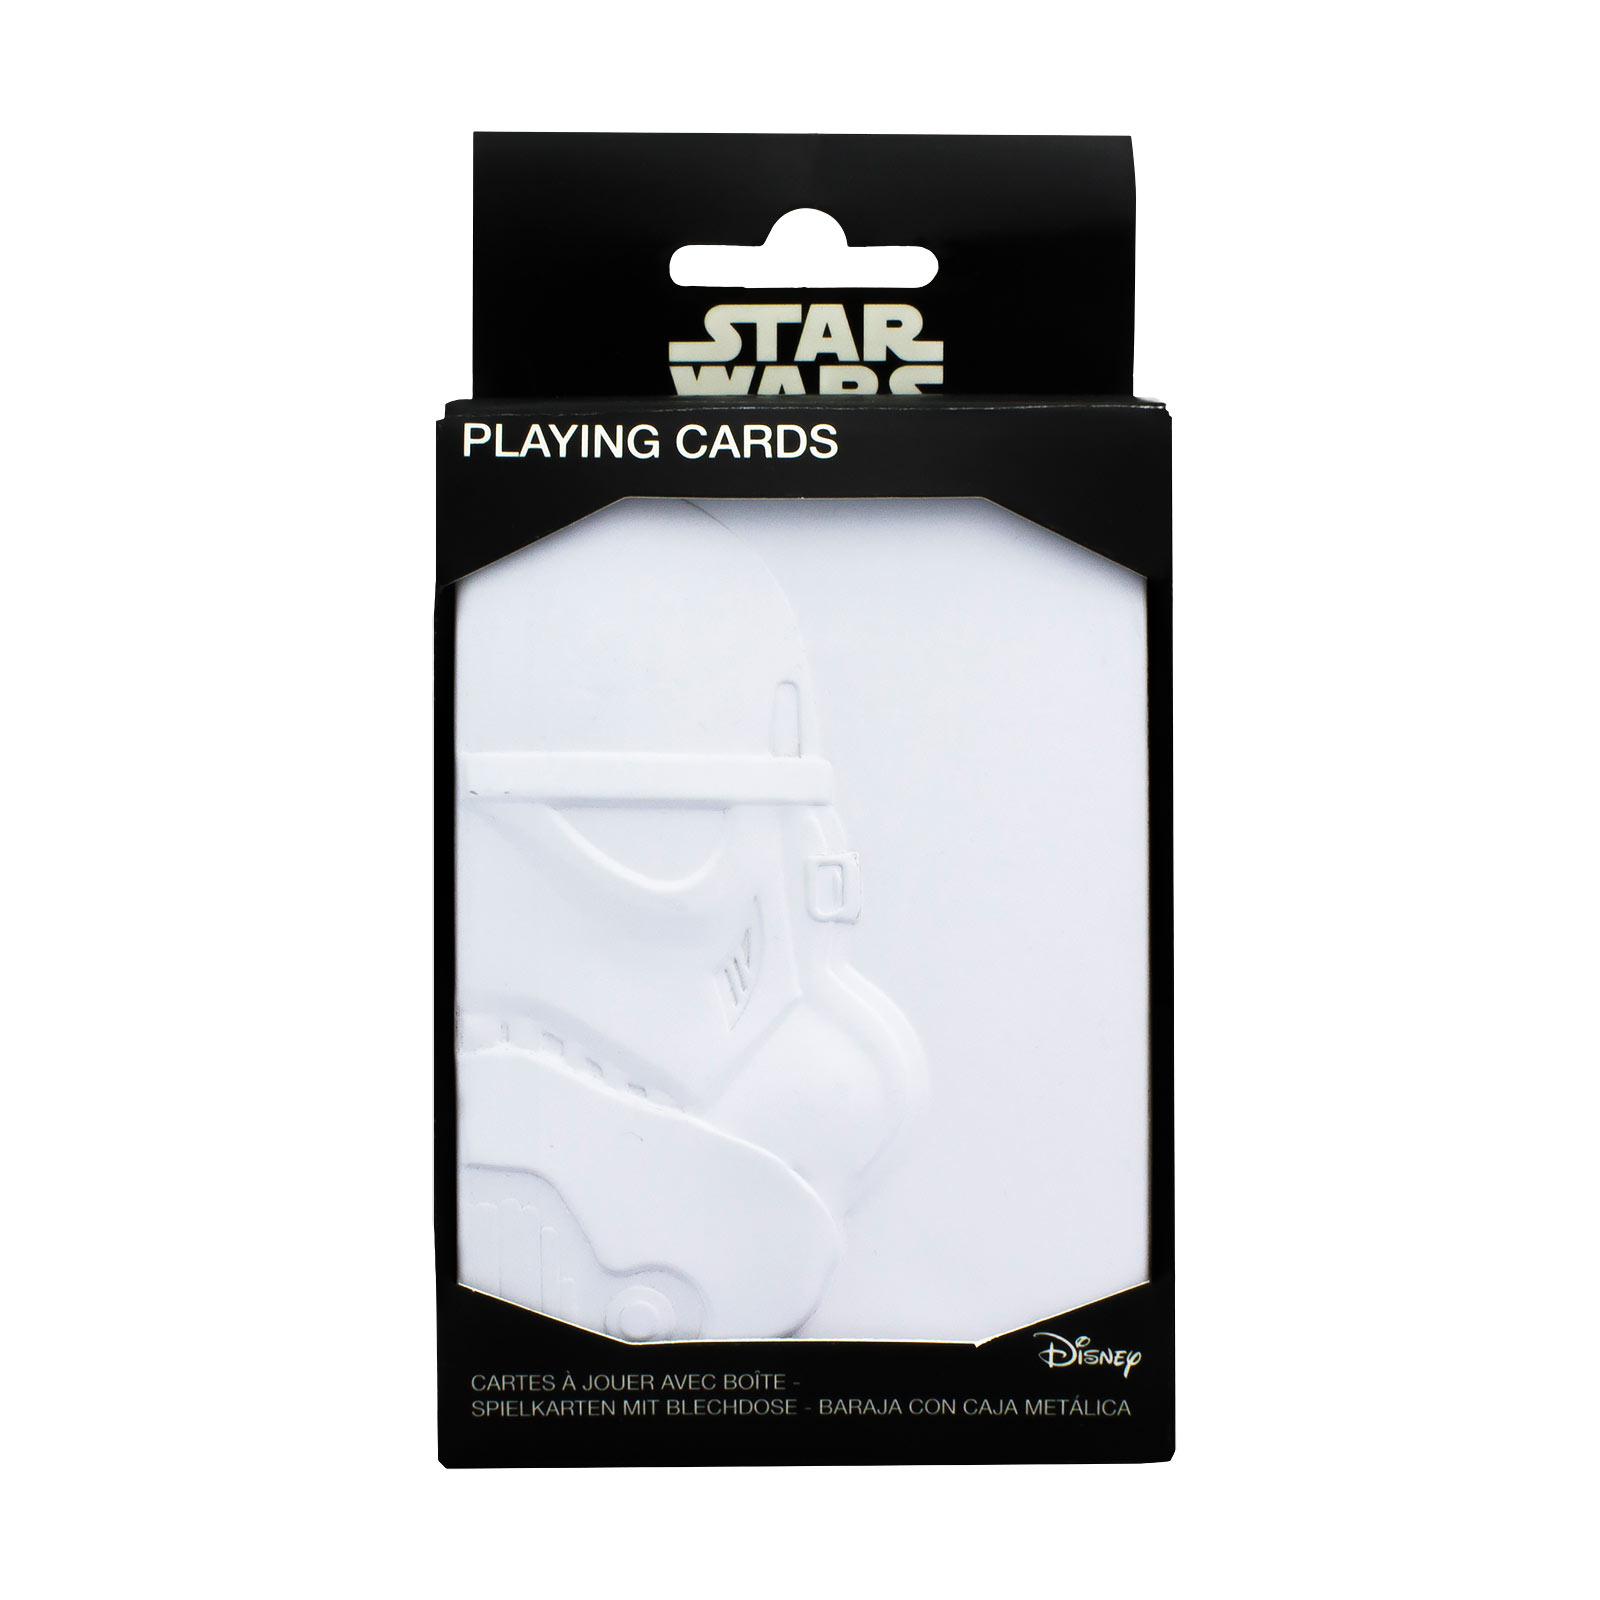 Star Wars - Stormtrooper Playing Cards in Metal Box